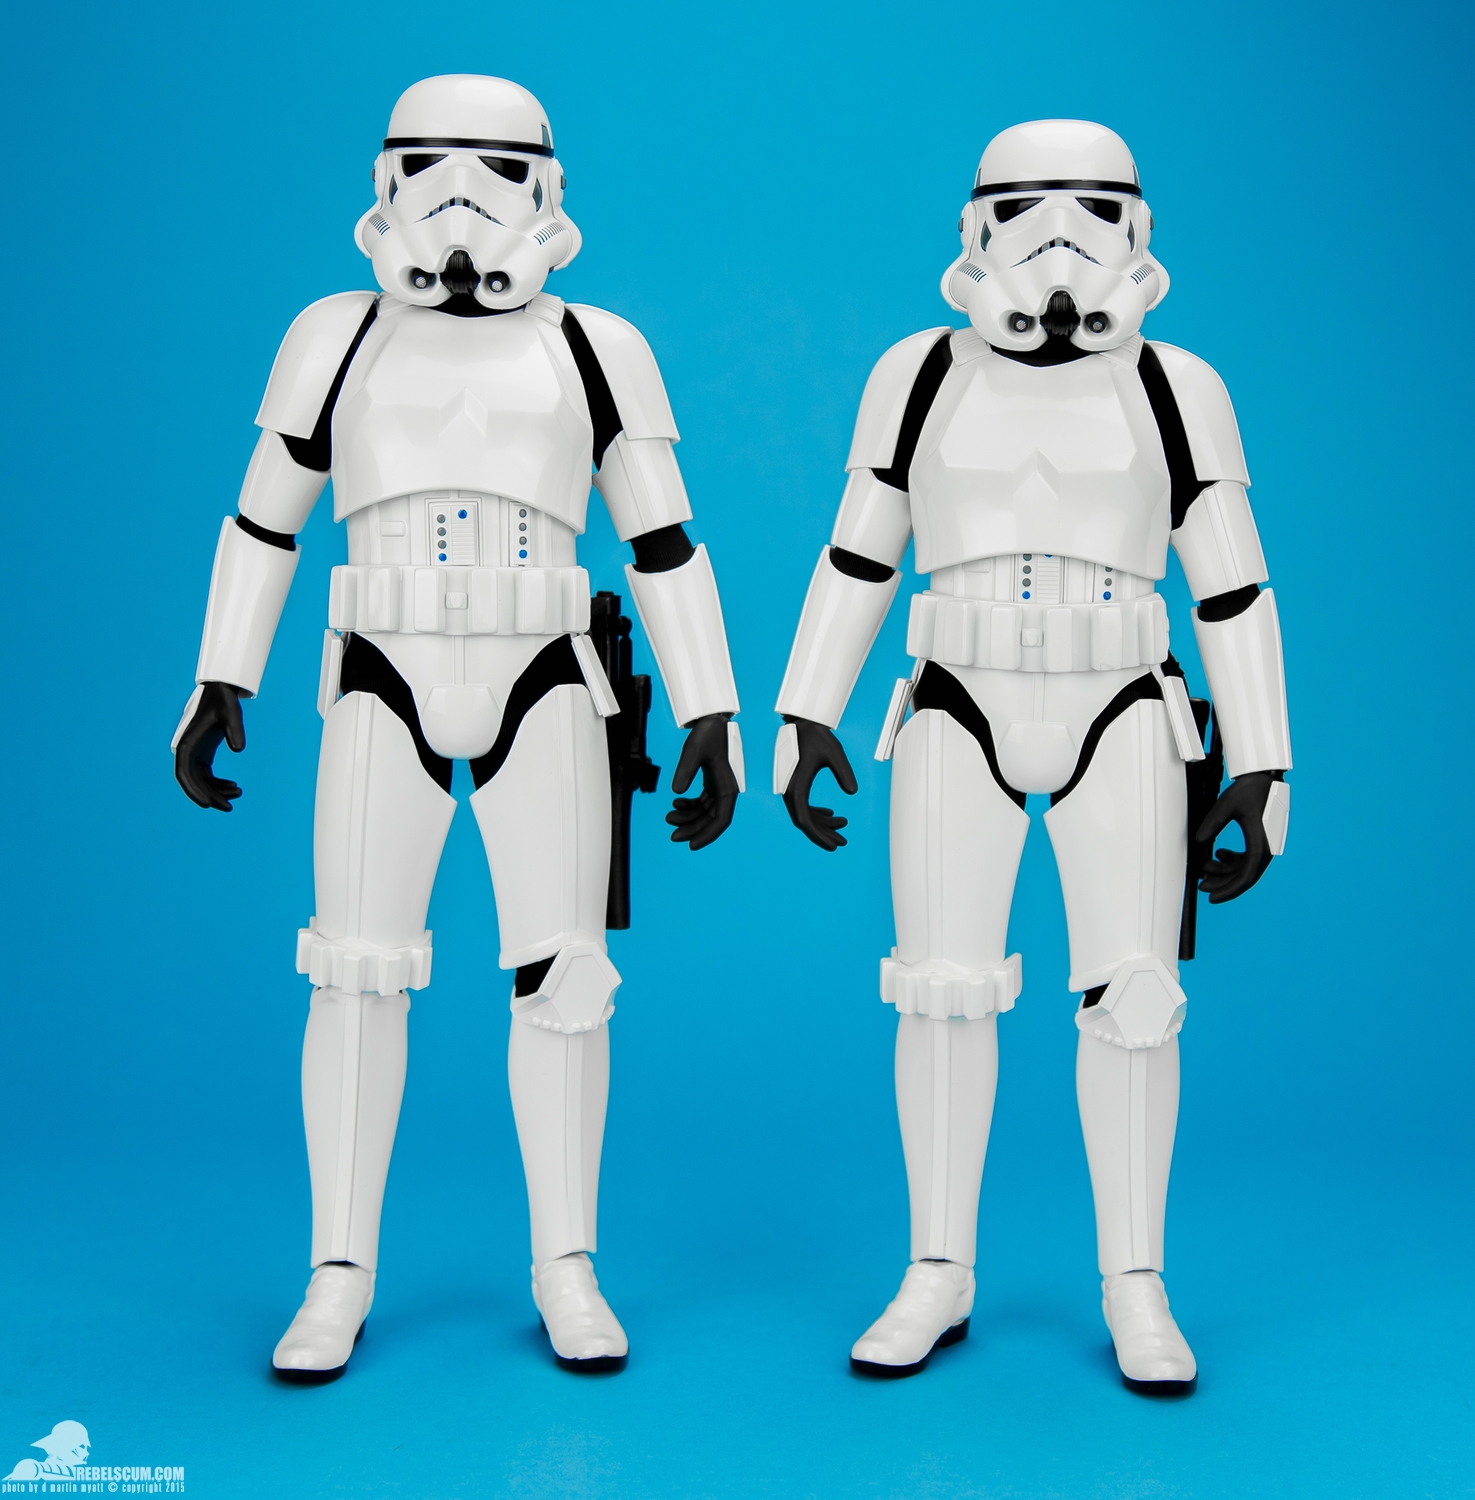 MMS268-Stormtroopers-Hot-Toys-Star-Wars-Two-Pack-023.jpg